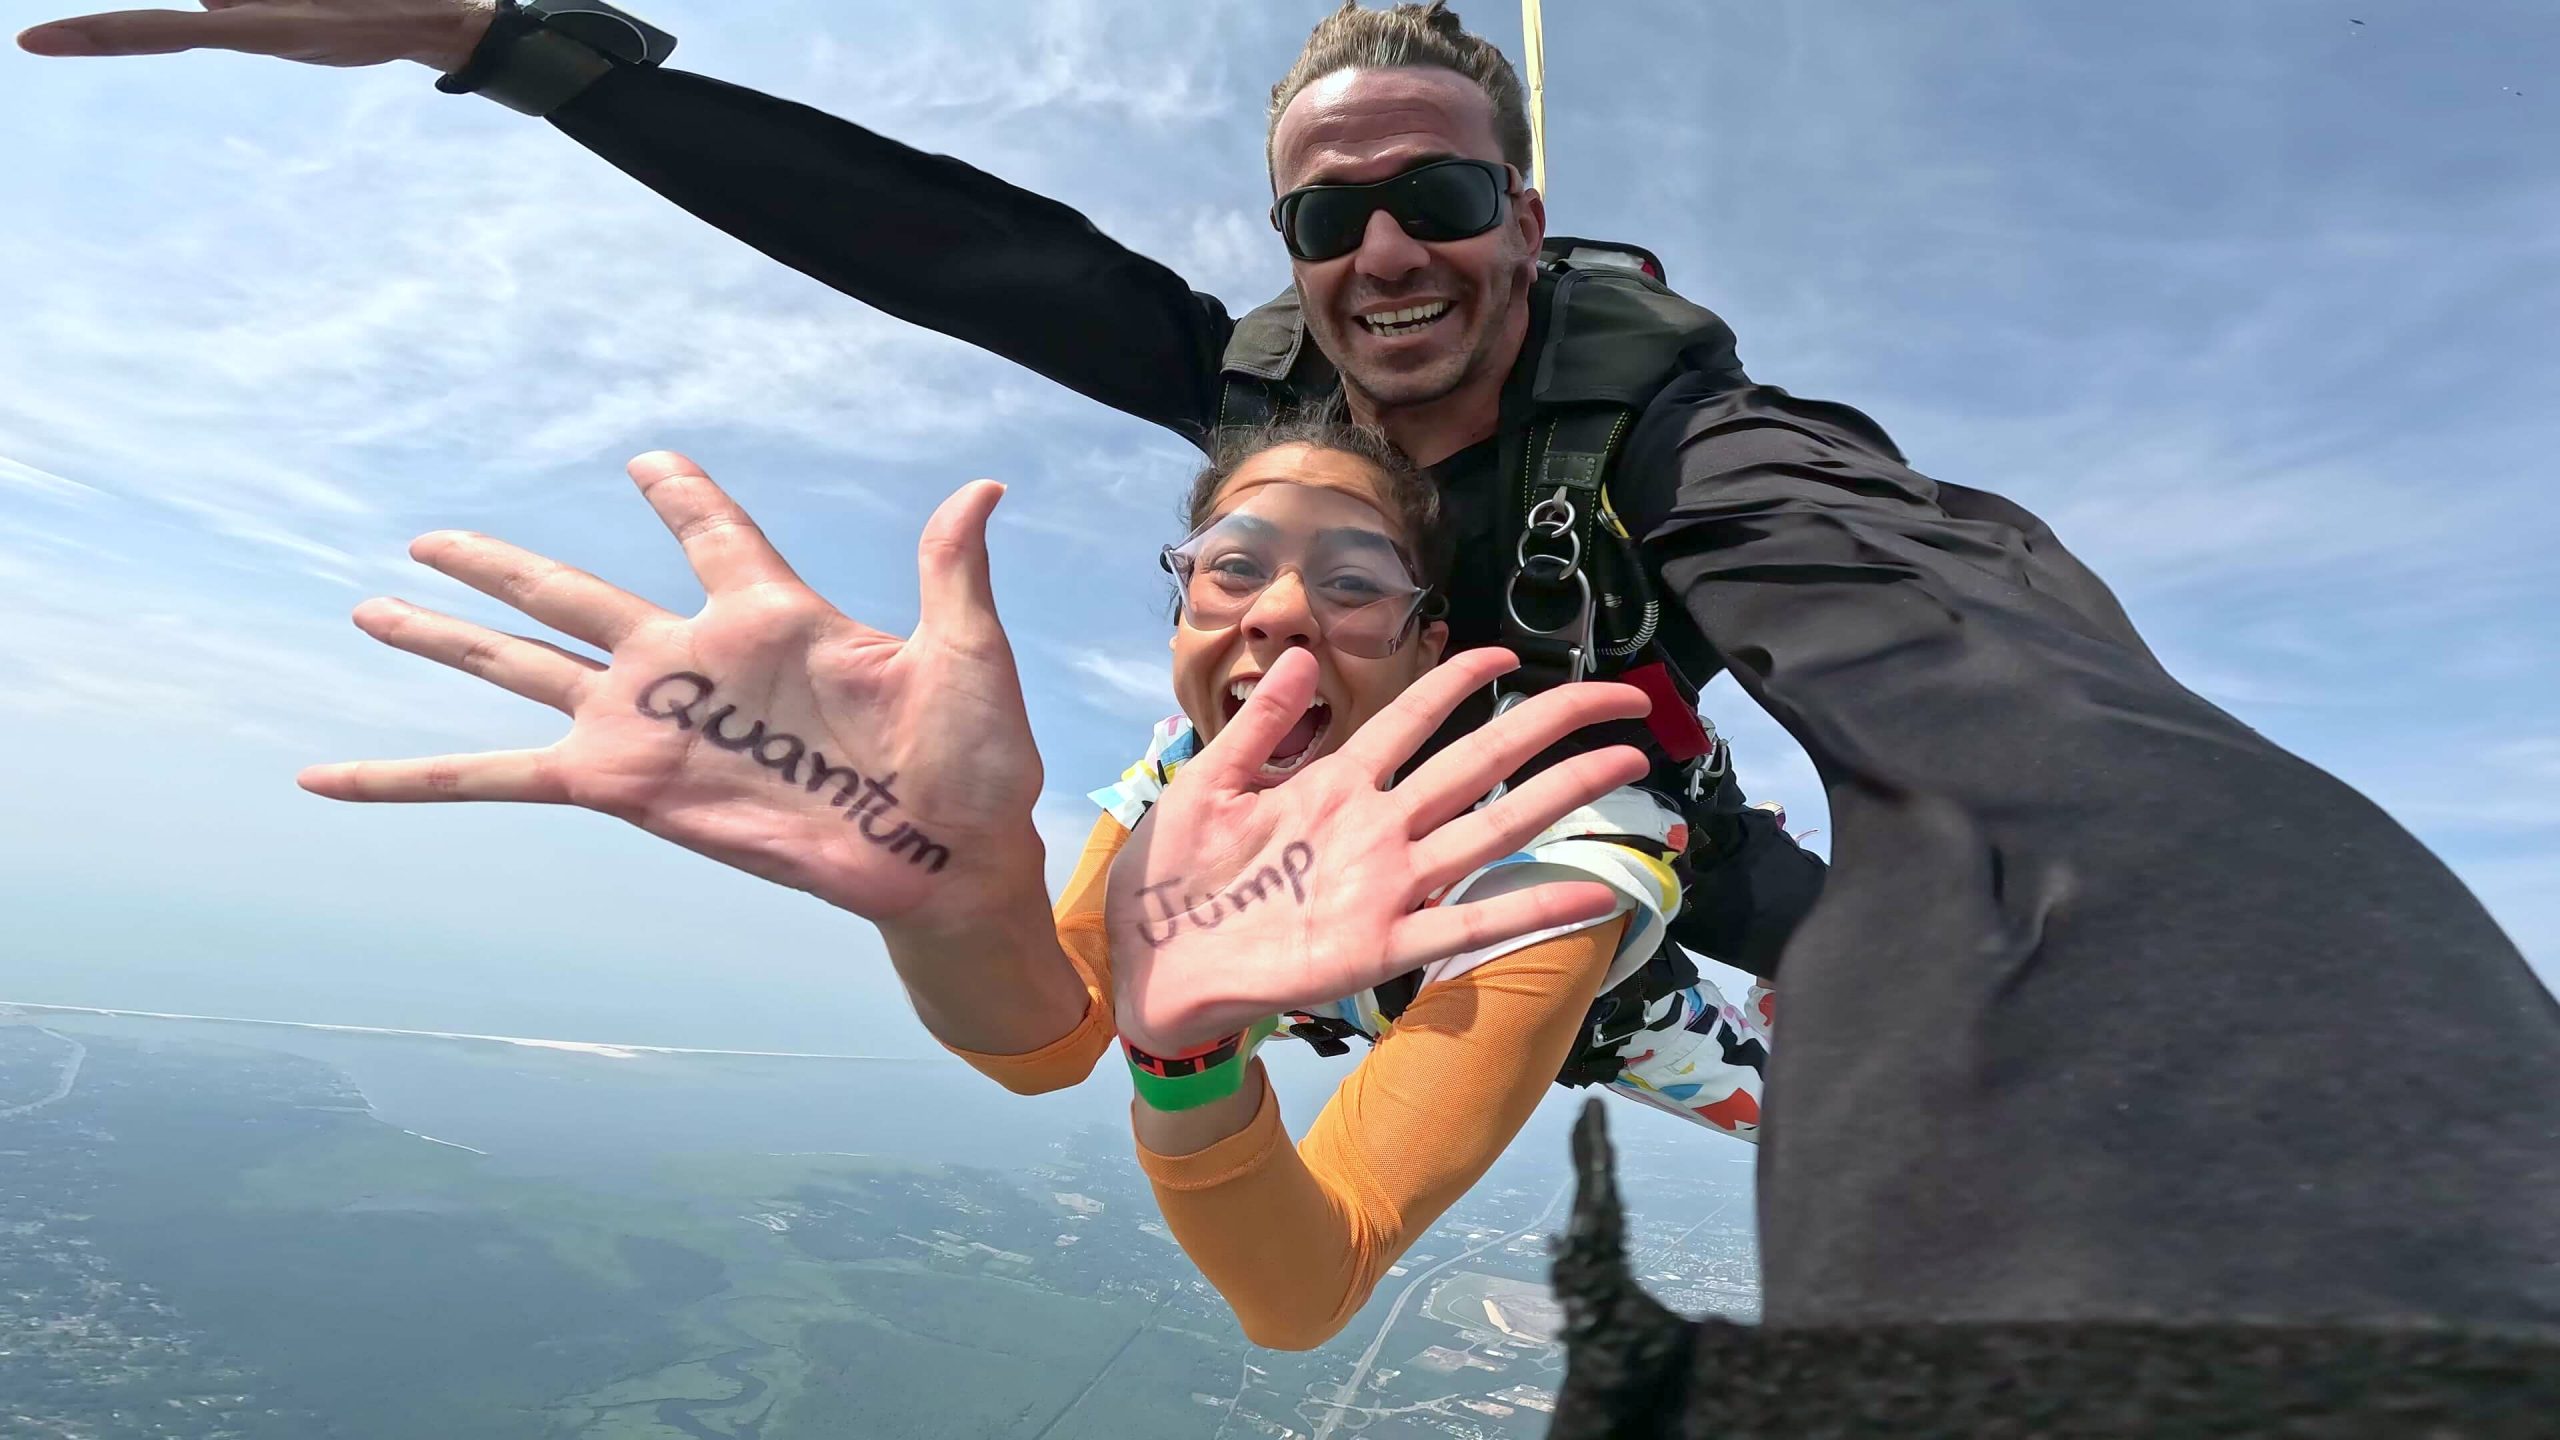 Girl jumping out of a plane with th ewords "quantum jump" written on her hands.